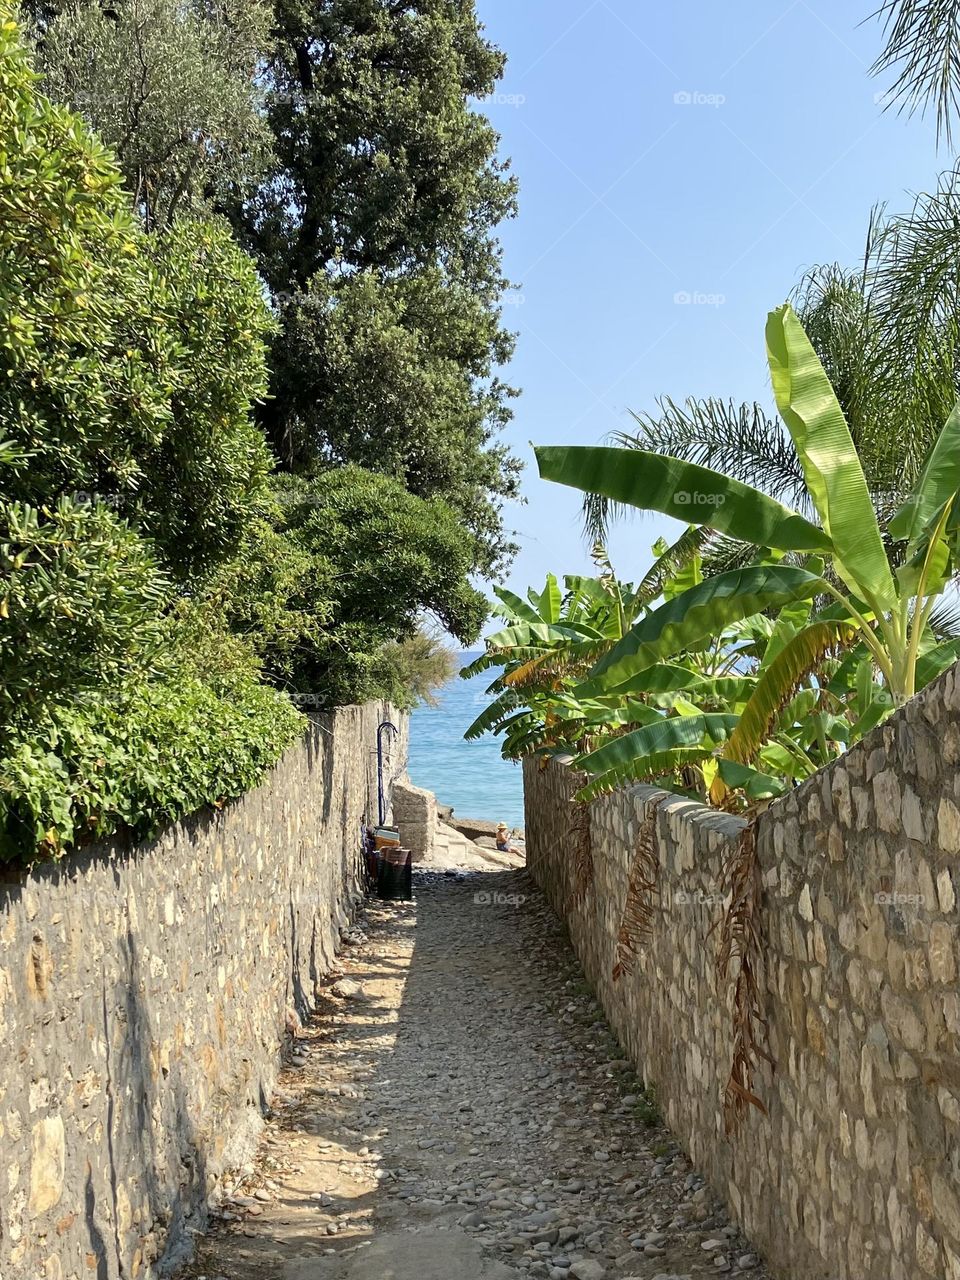 In a narrow alley leading to the sea